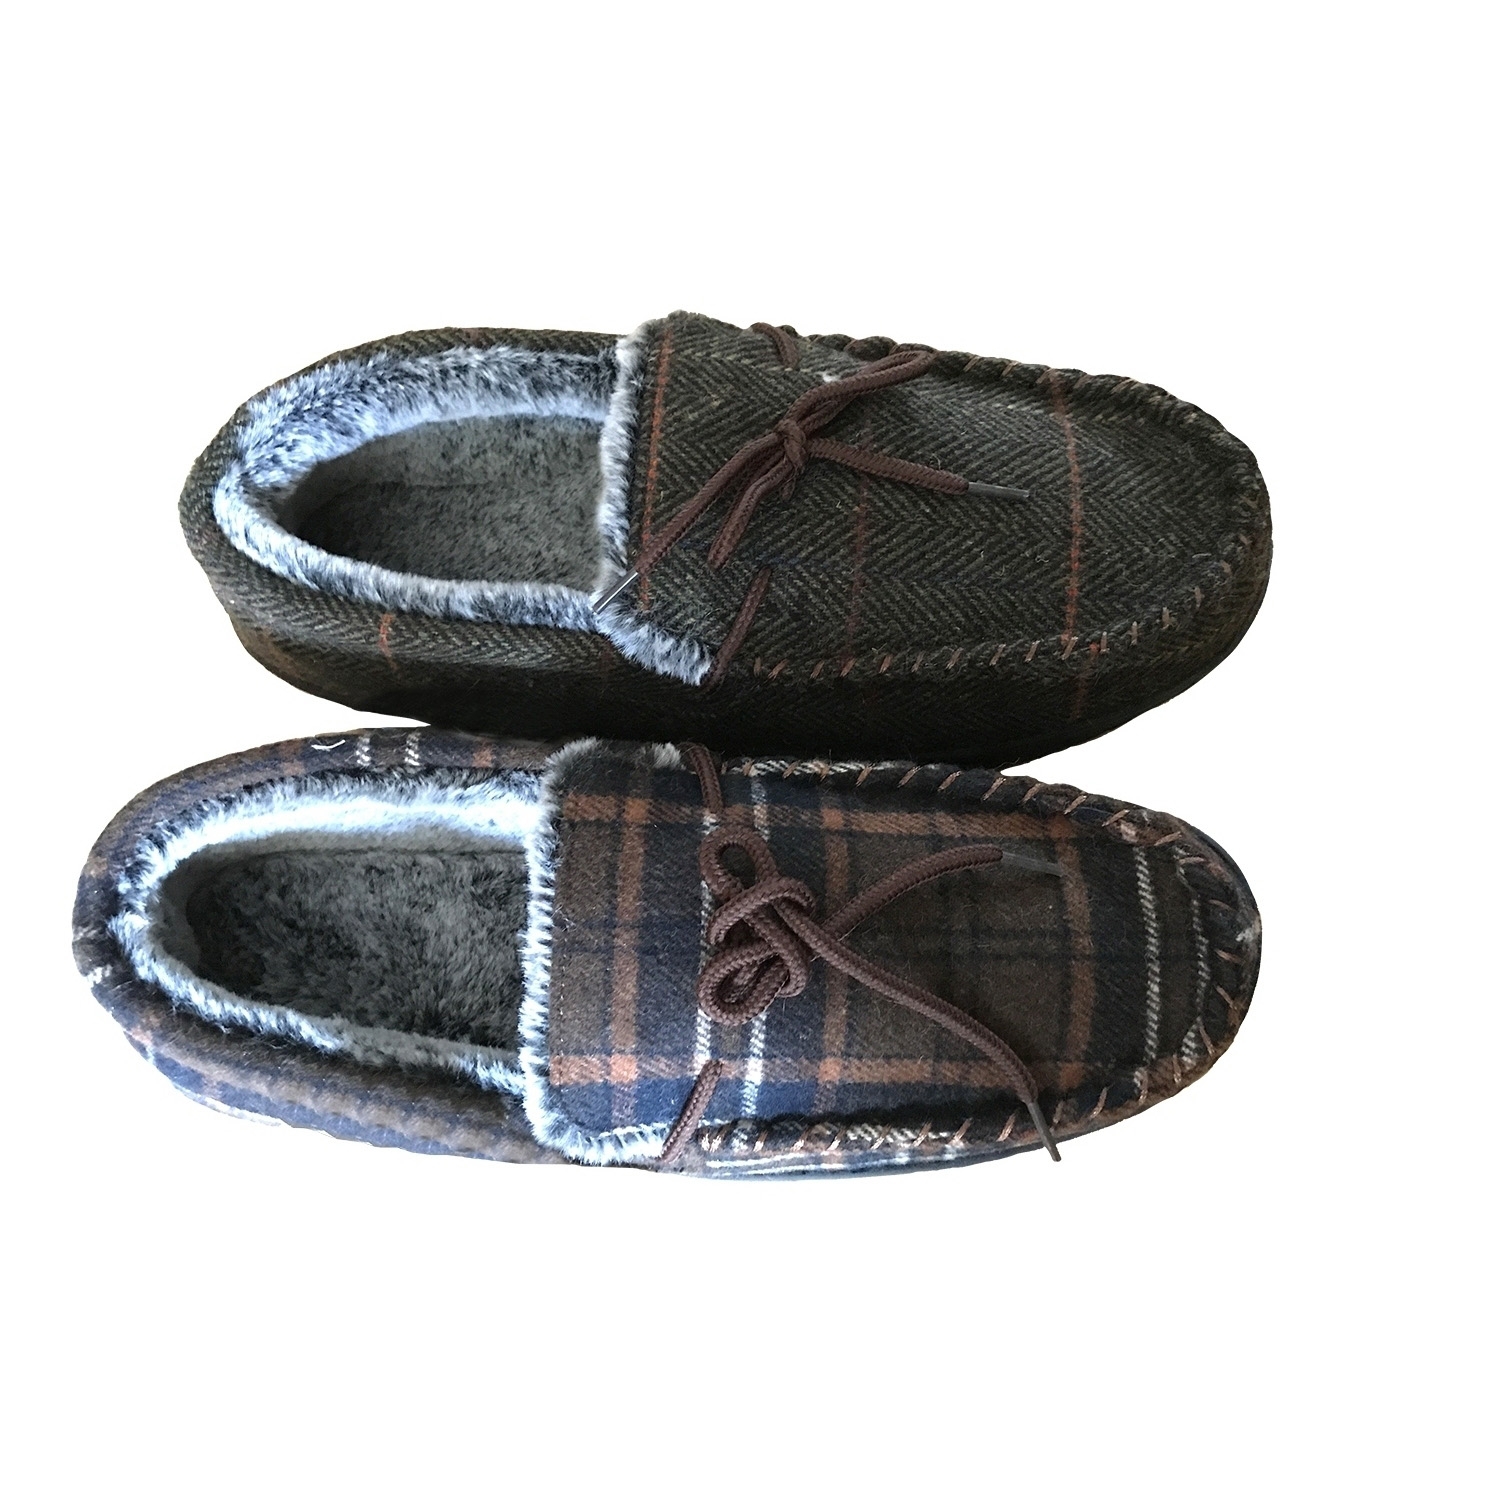 Men's Felt Moccasin with Tie Slipper Slip On Casual Shoes